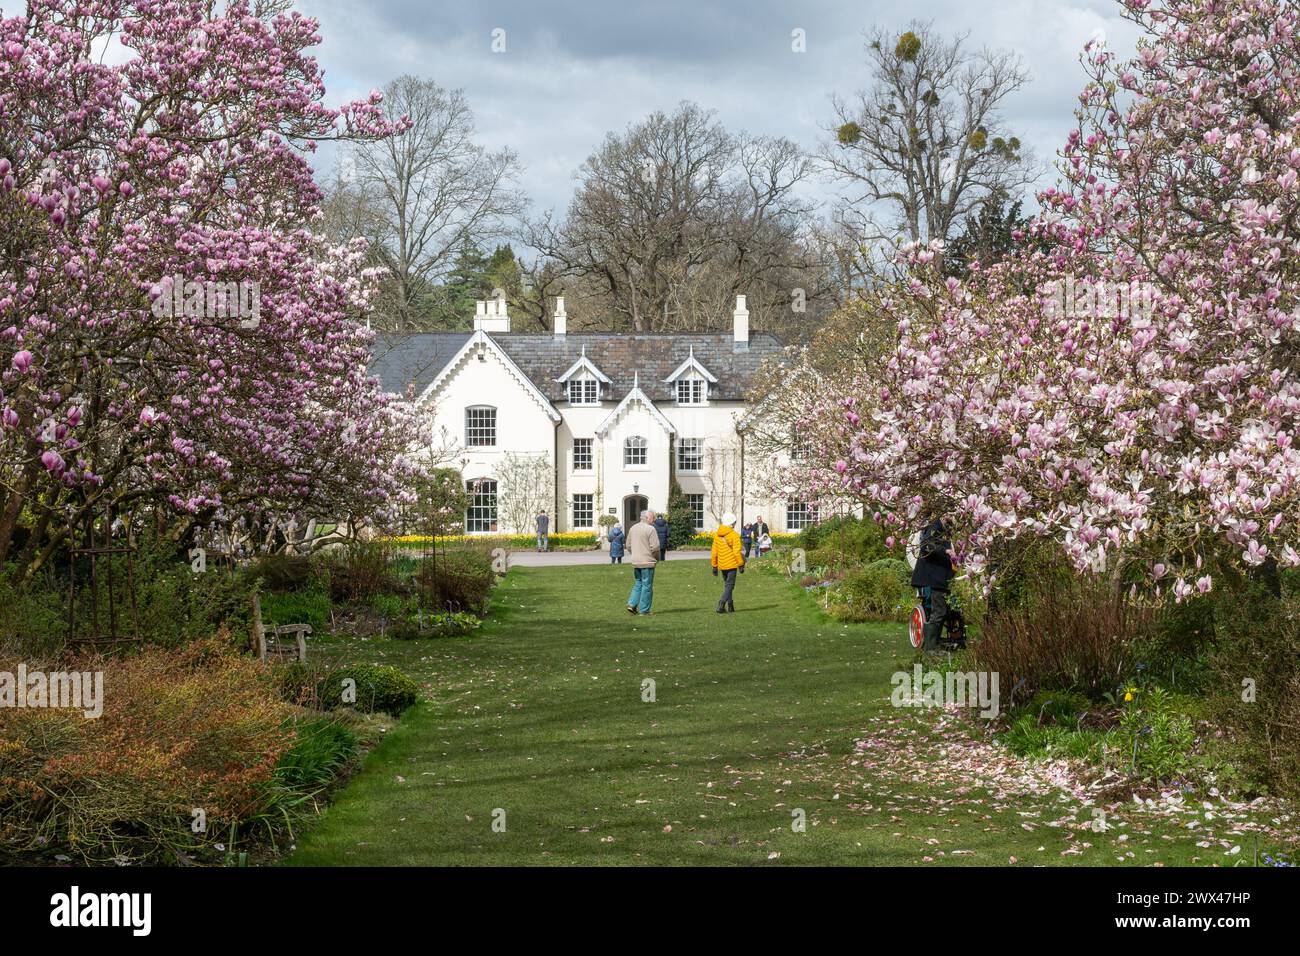 Jermyn's House at Sir Harold Hillier Gardens, viewed through magnolias, Hampshire, England, UK, with people enjoying the garden during March or spring Stock Photo